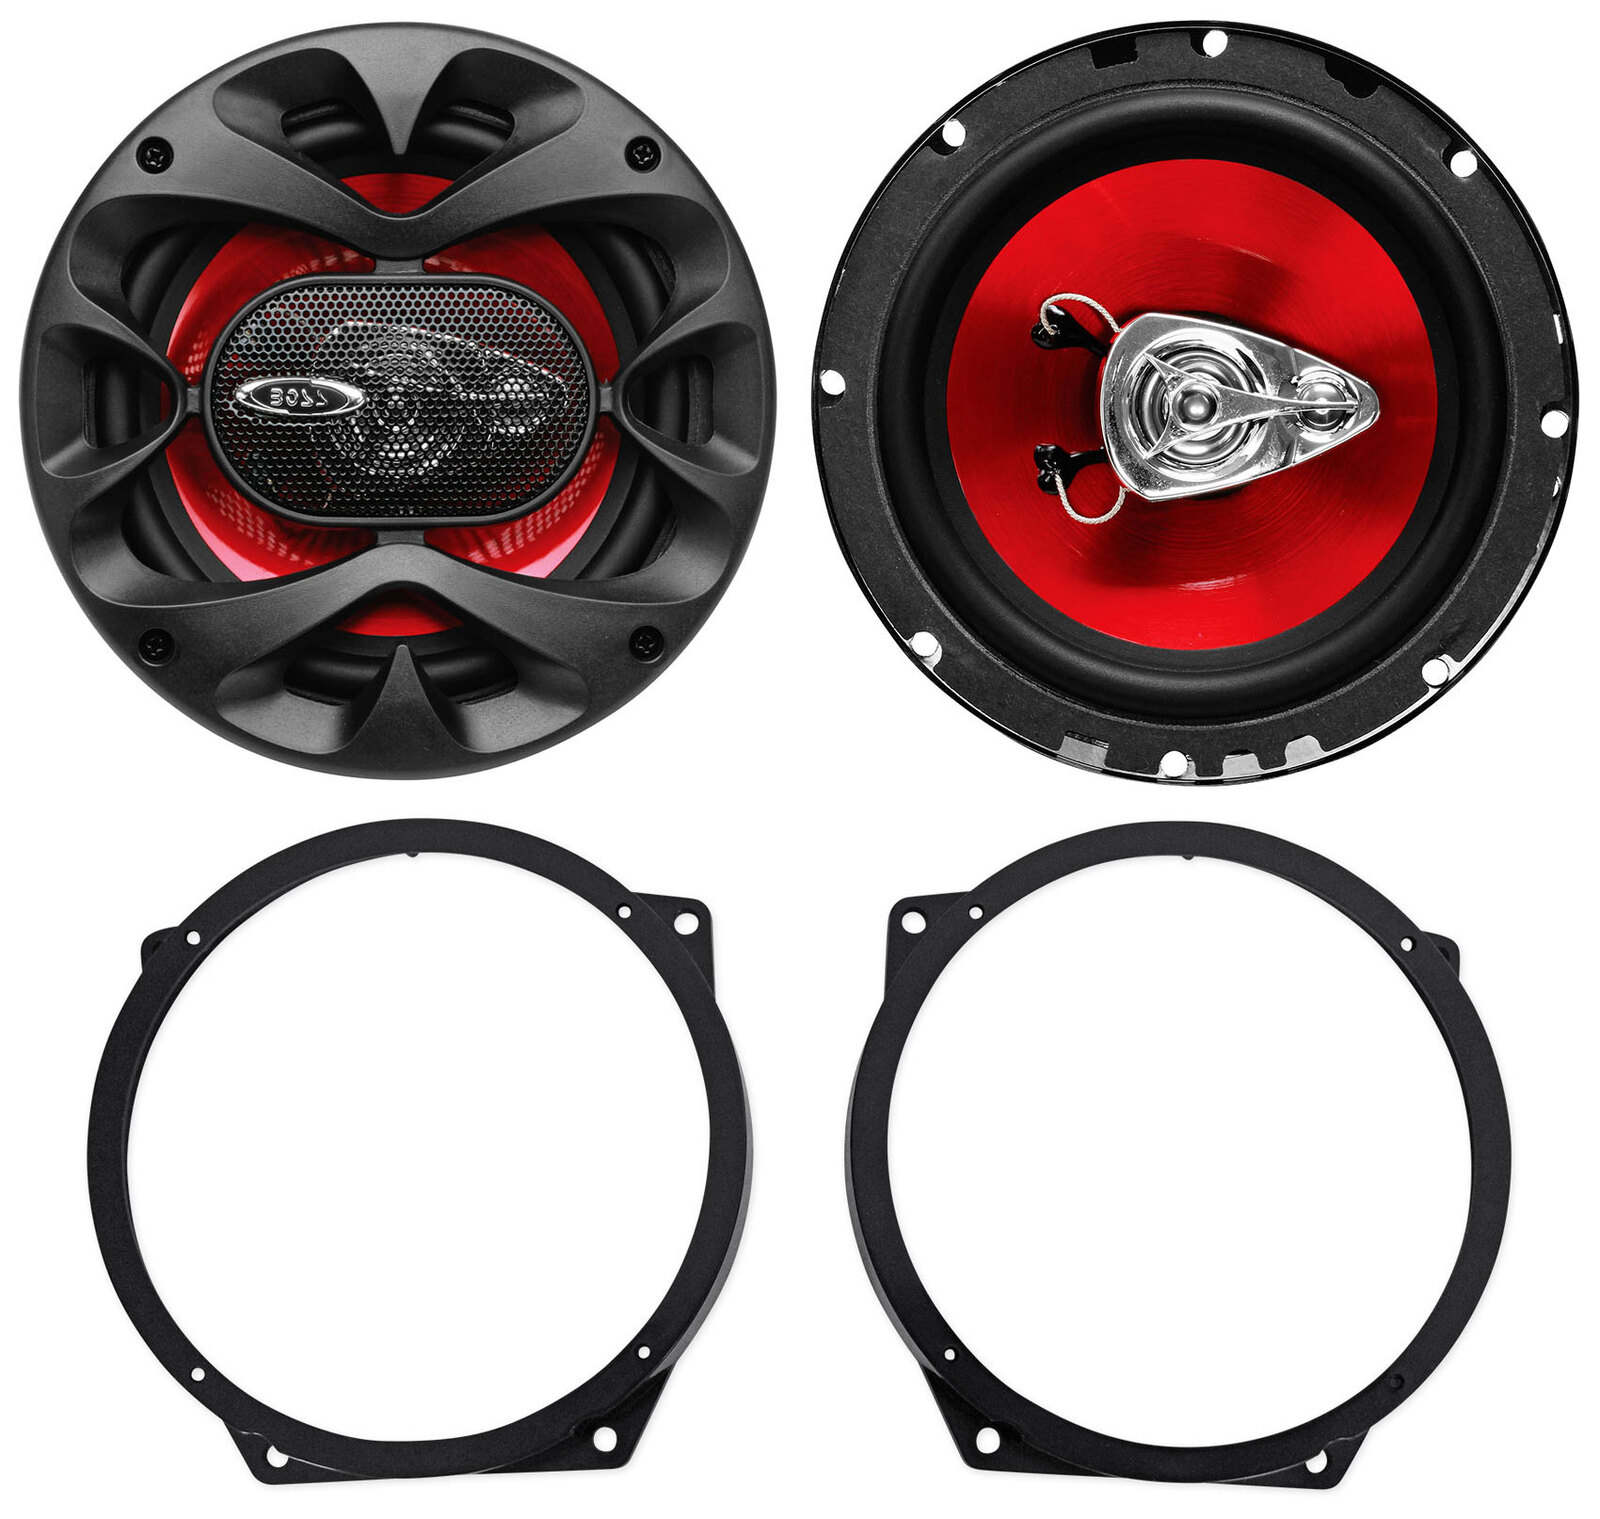 Boss Audio CH6530 Chaos 6.5" Speakers